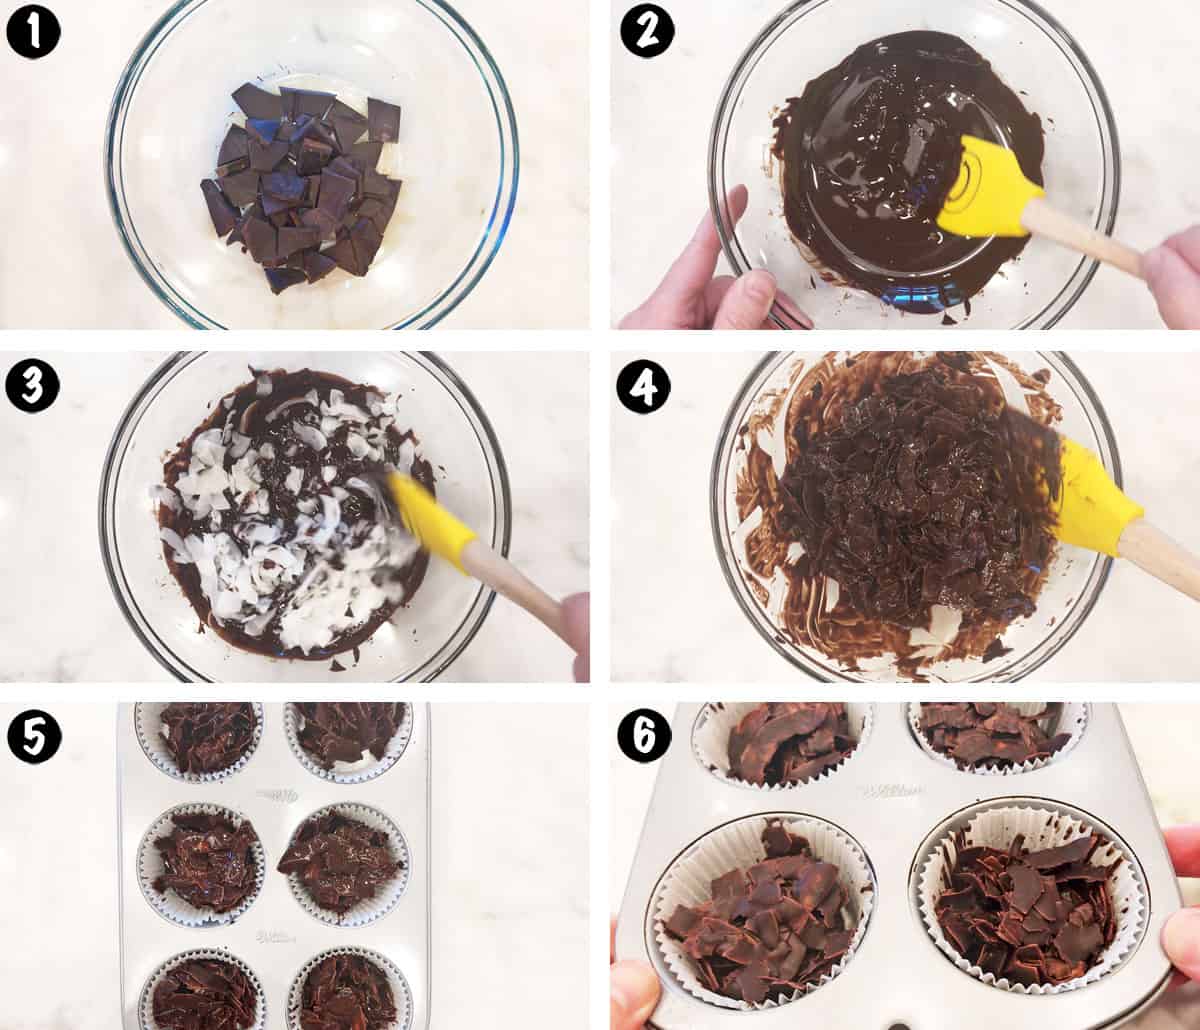 A photo collage showing the steps for making coconut clusters.